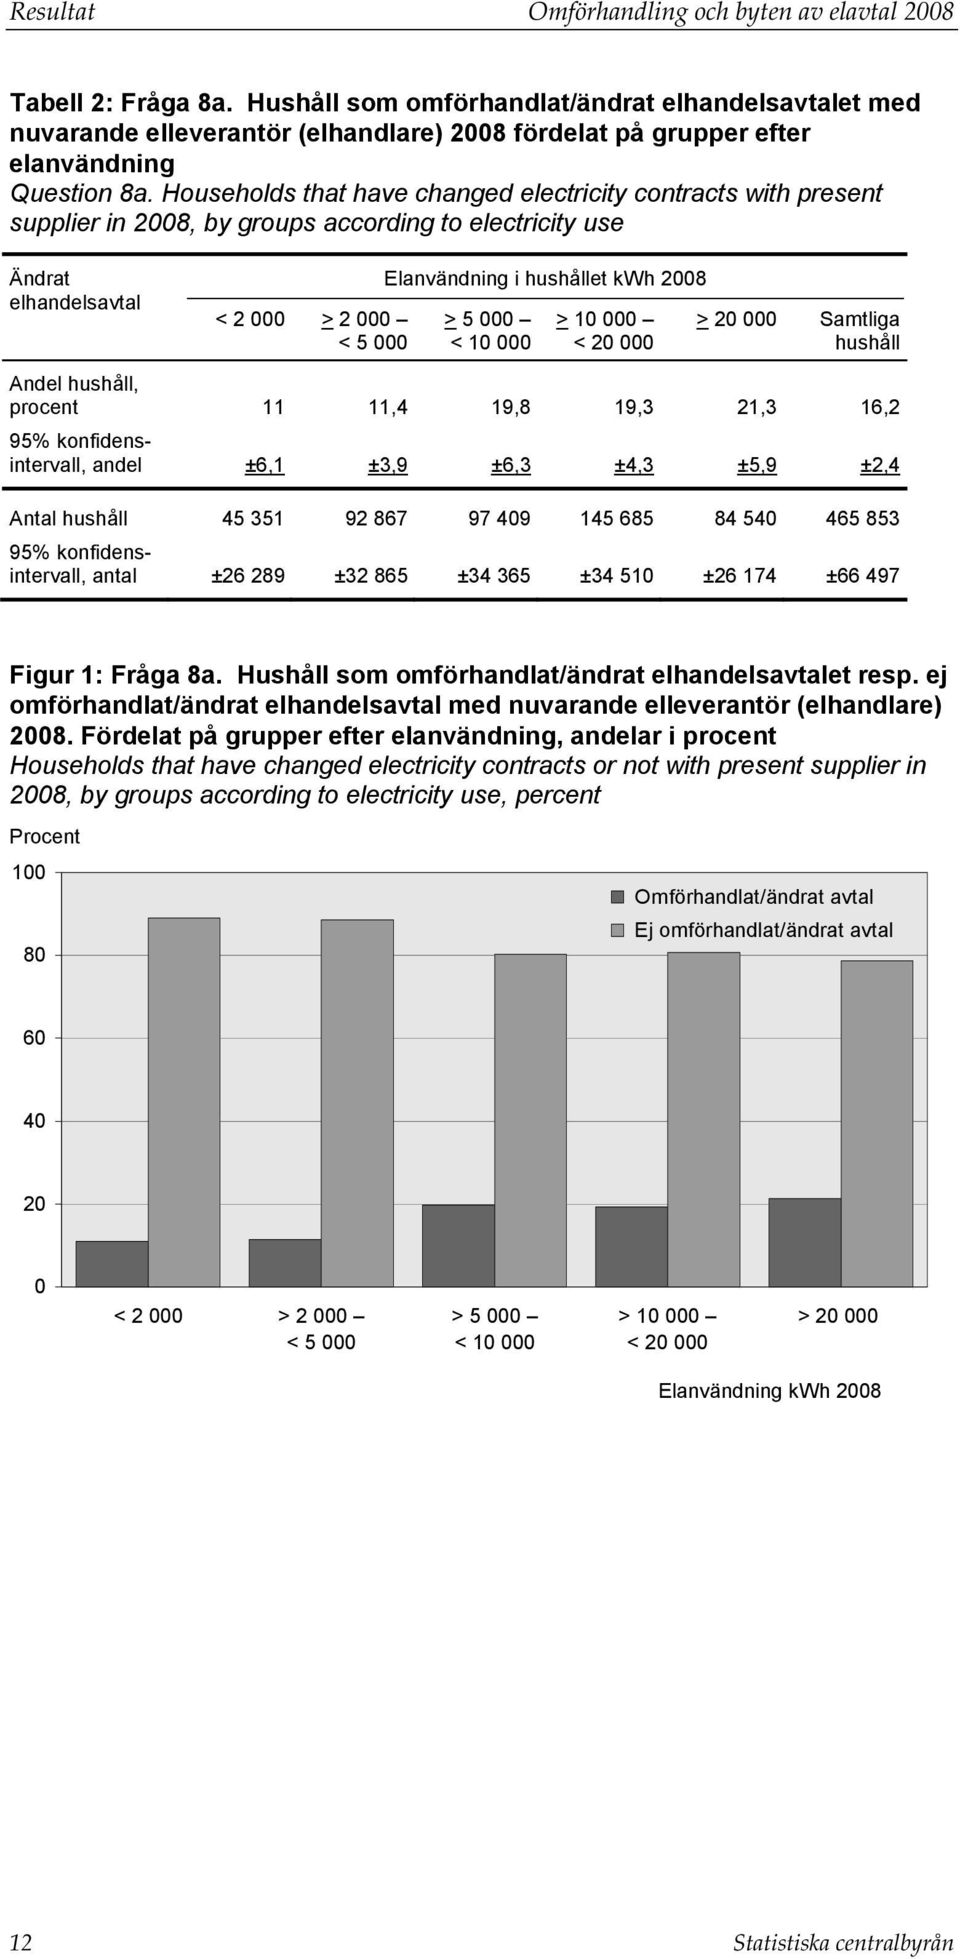 Households that have changed electricity contracts with present supplier in 2008, by groups according to electricity use Ändrat elhandelsavtal < 2 000 > 2 000 < 5 000 Elanvändning i hushållet kwh